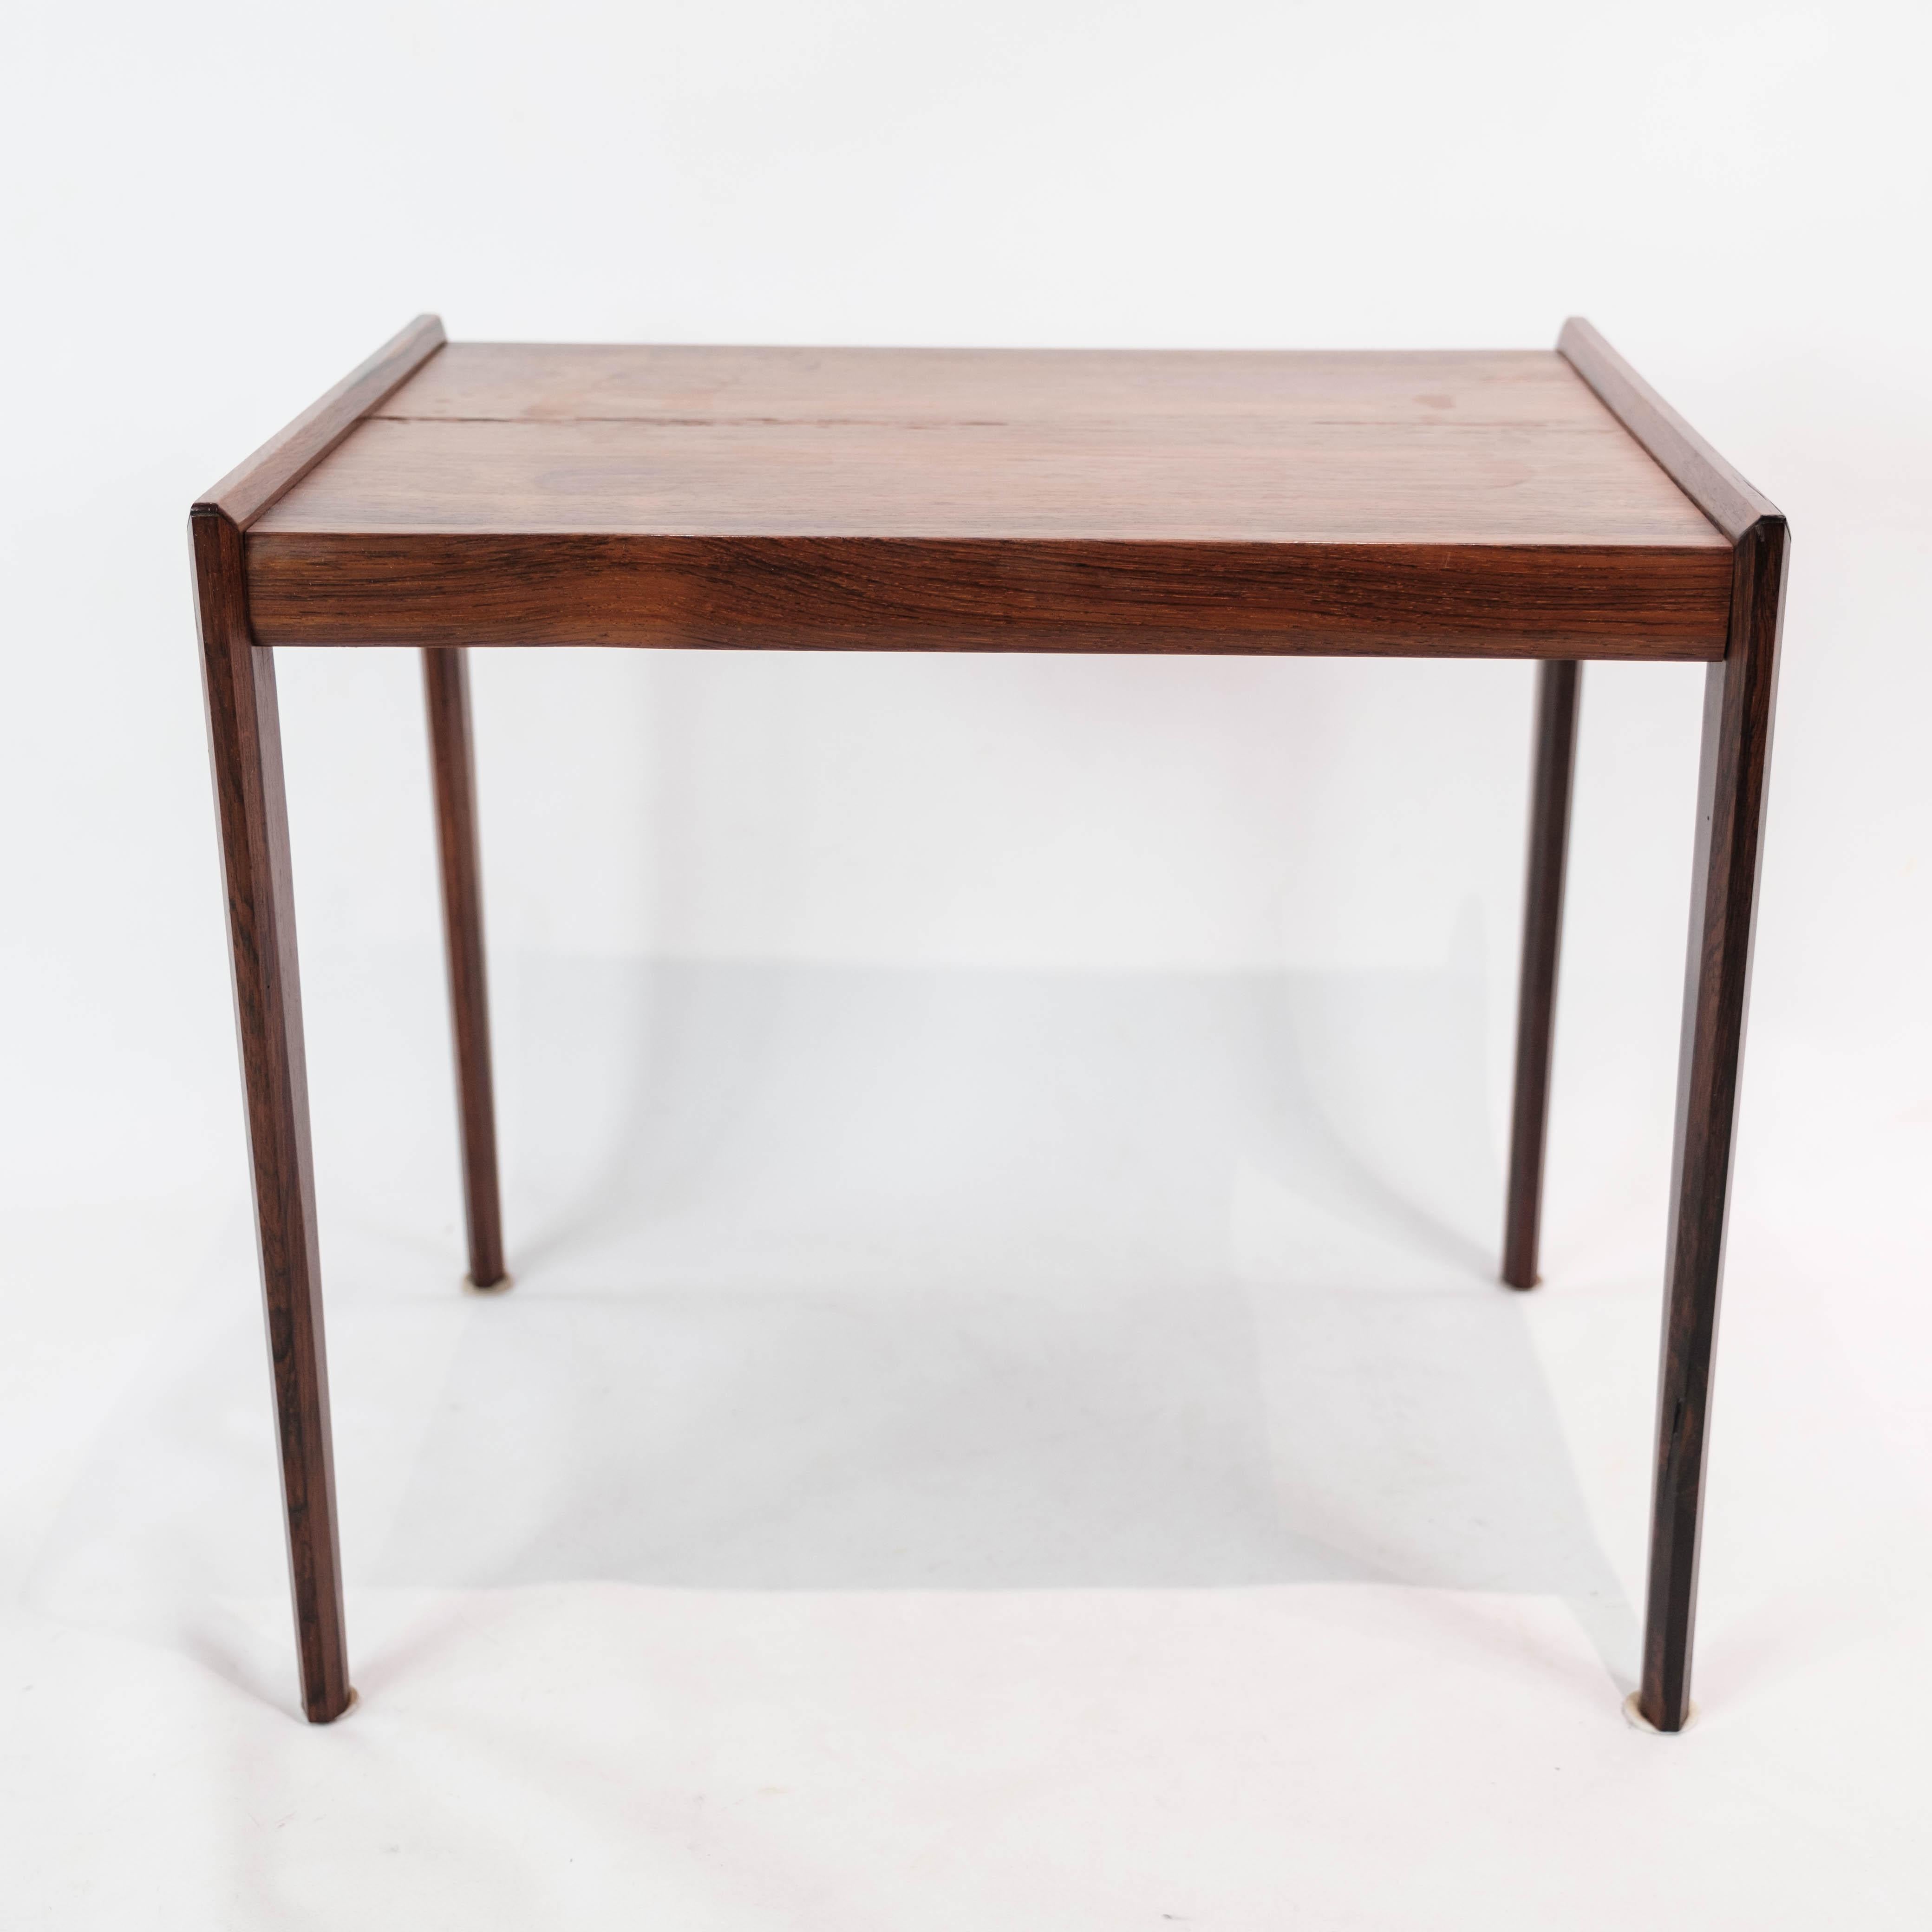 Side table in rosewood of Danish design from the 1960s. The table is in great vintage condition.